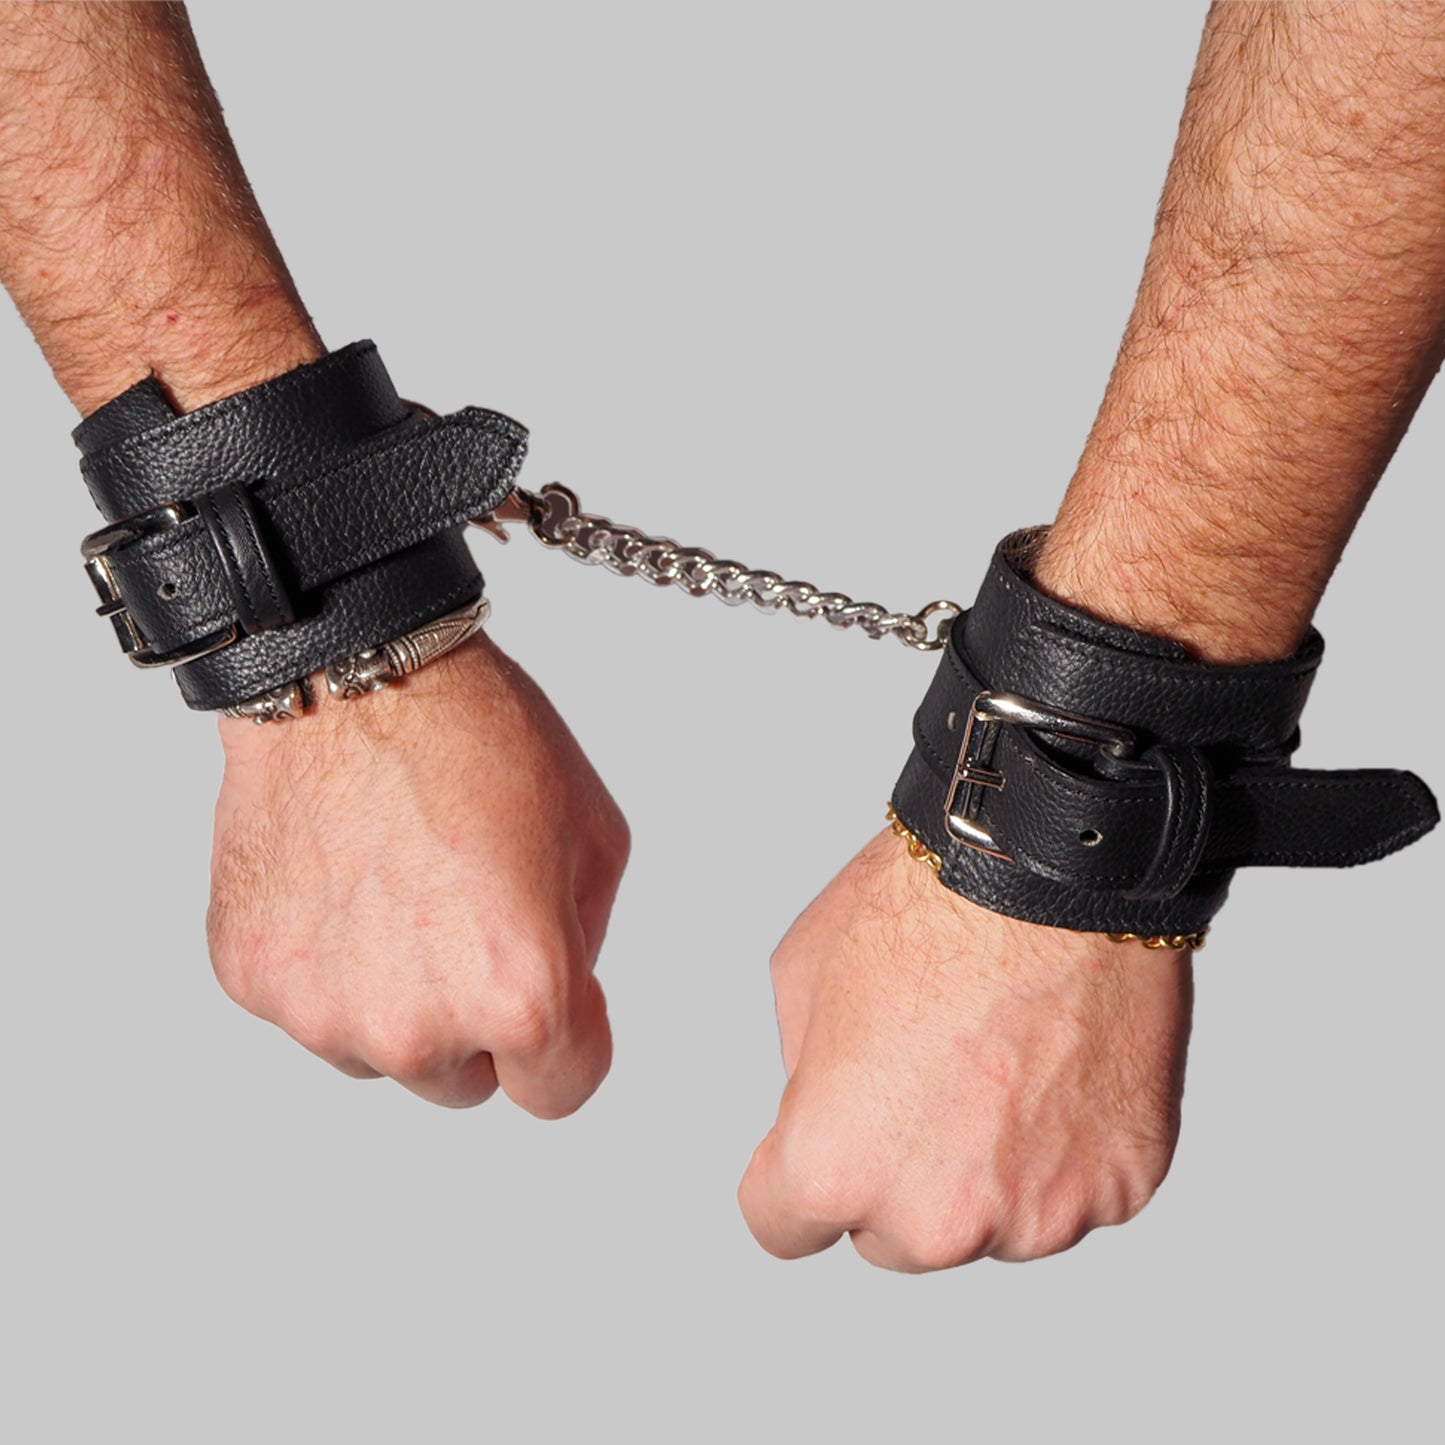 Subculture Hand-Cuffs 101 - Subculture